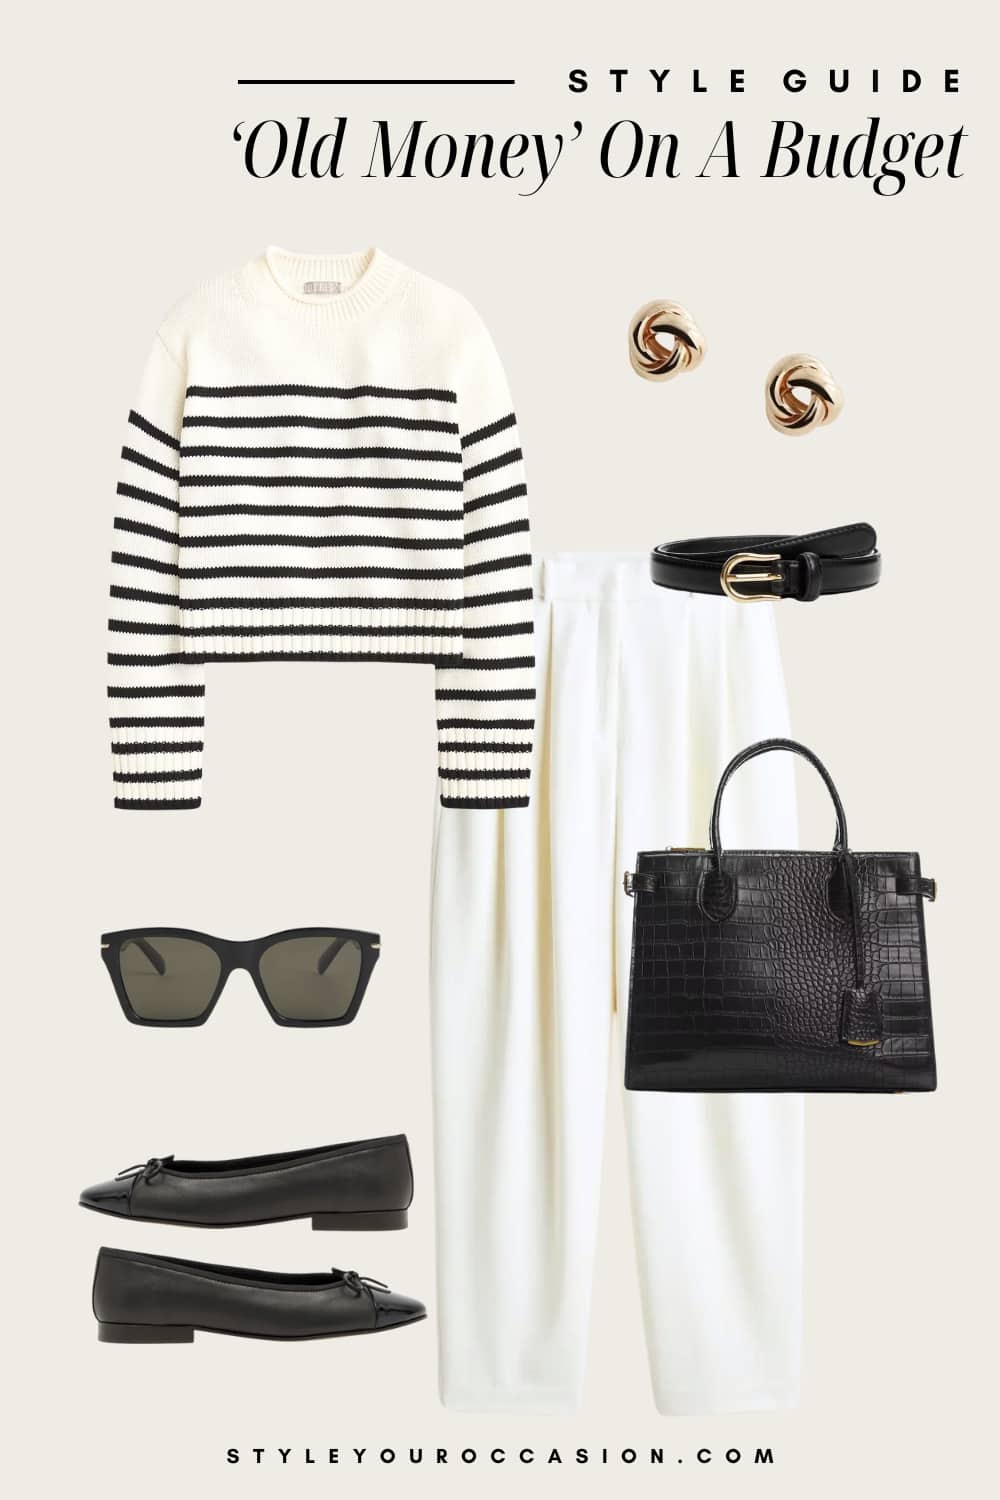 an image board of an old money outfit featuring white pleated pants, a striped white and black crewneck sweater, black cap toe ballet flats, and black and gold accessories